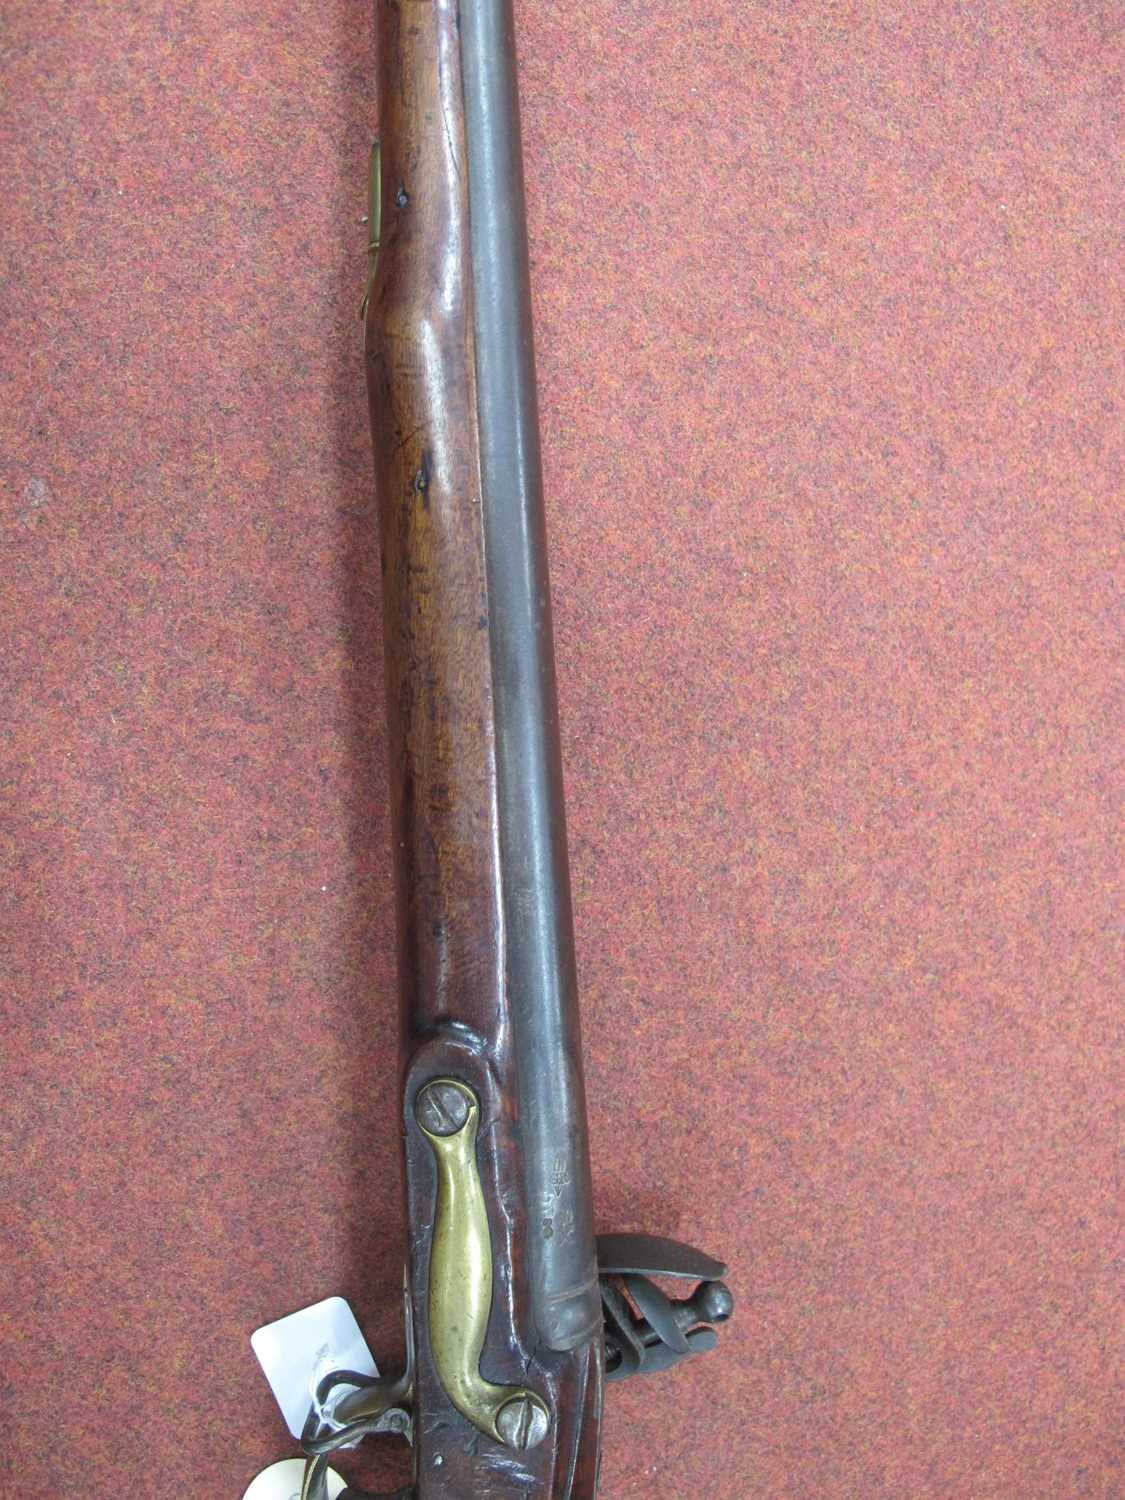 British India Pattern Circa 1810 'Brown Bess' Flintlock Musket, marked 'Tower' with 'GR' crown - Image 15 of 17